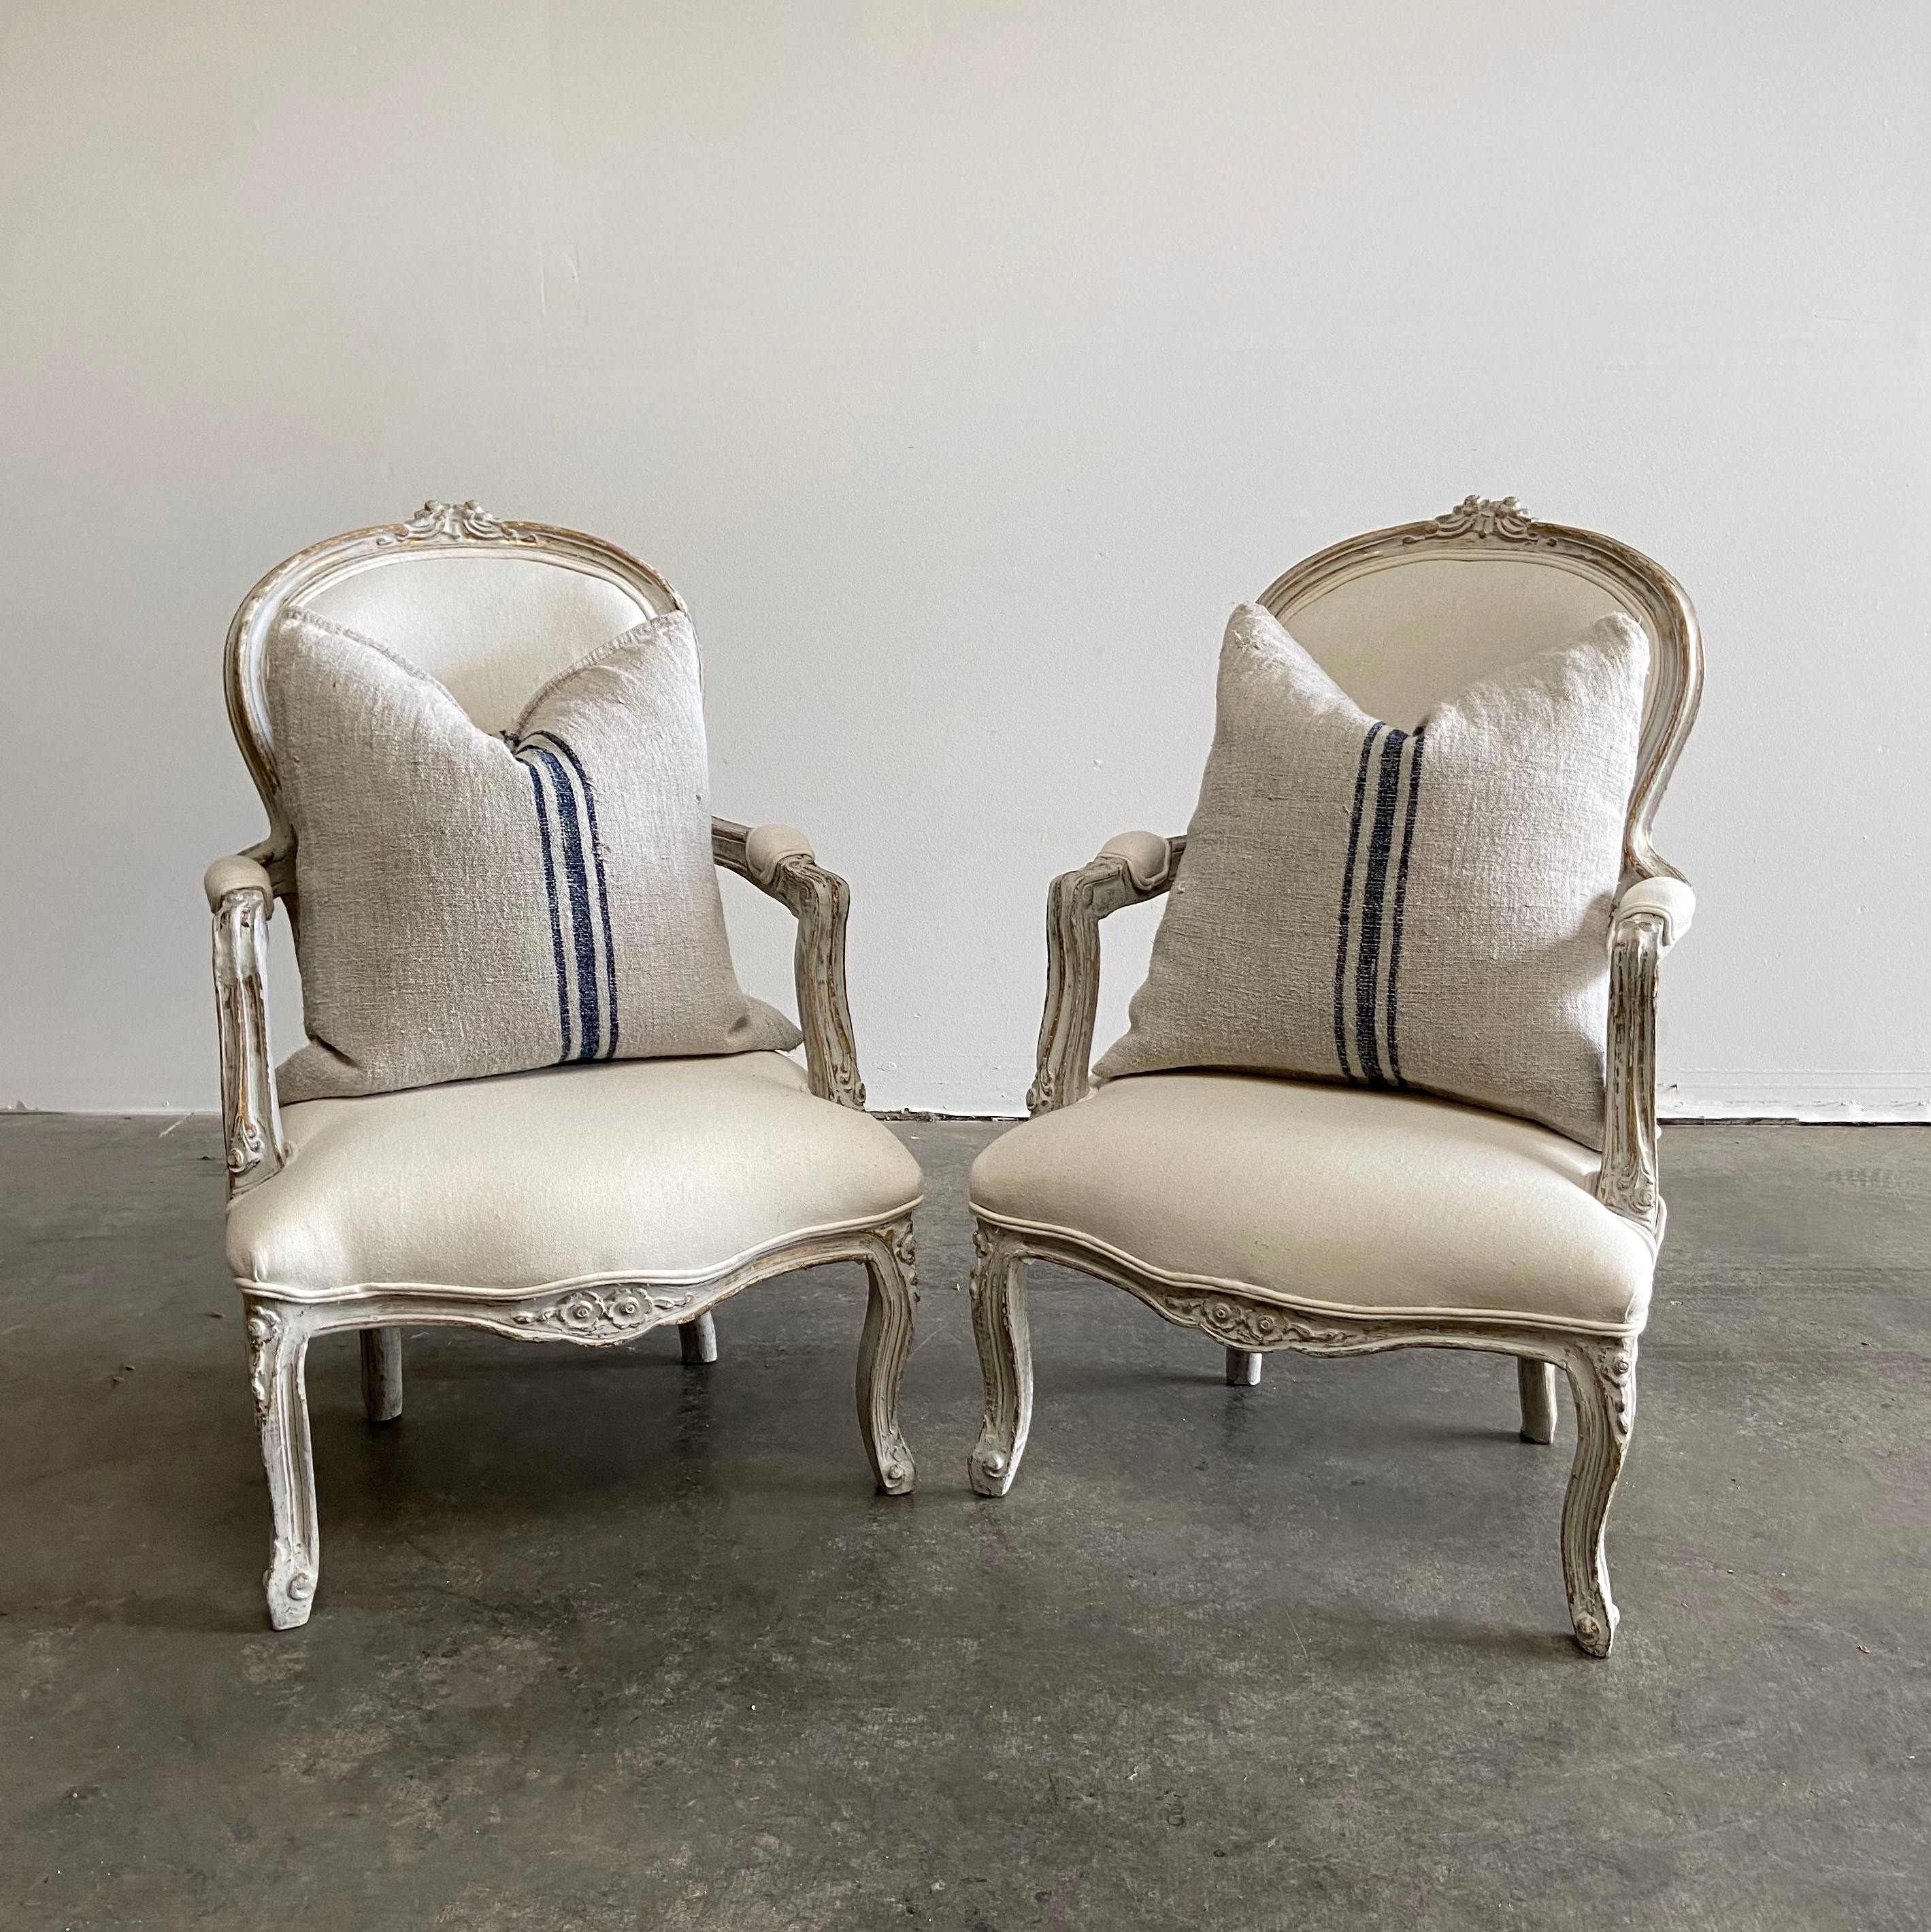 Pair of painted and upholstered Louis XV style open armchairs
Beautiful painted chairs in soft white with subtle antique distressing. An oyster grey hue, with gilt flecks peeking through the paint. Soft rounded scrolls, and hand carved flowers, and